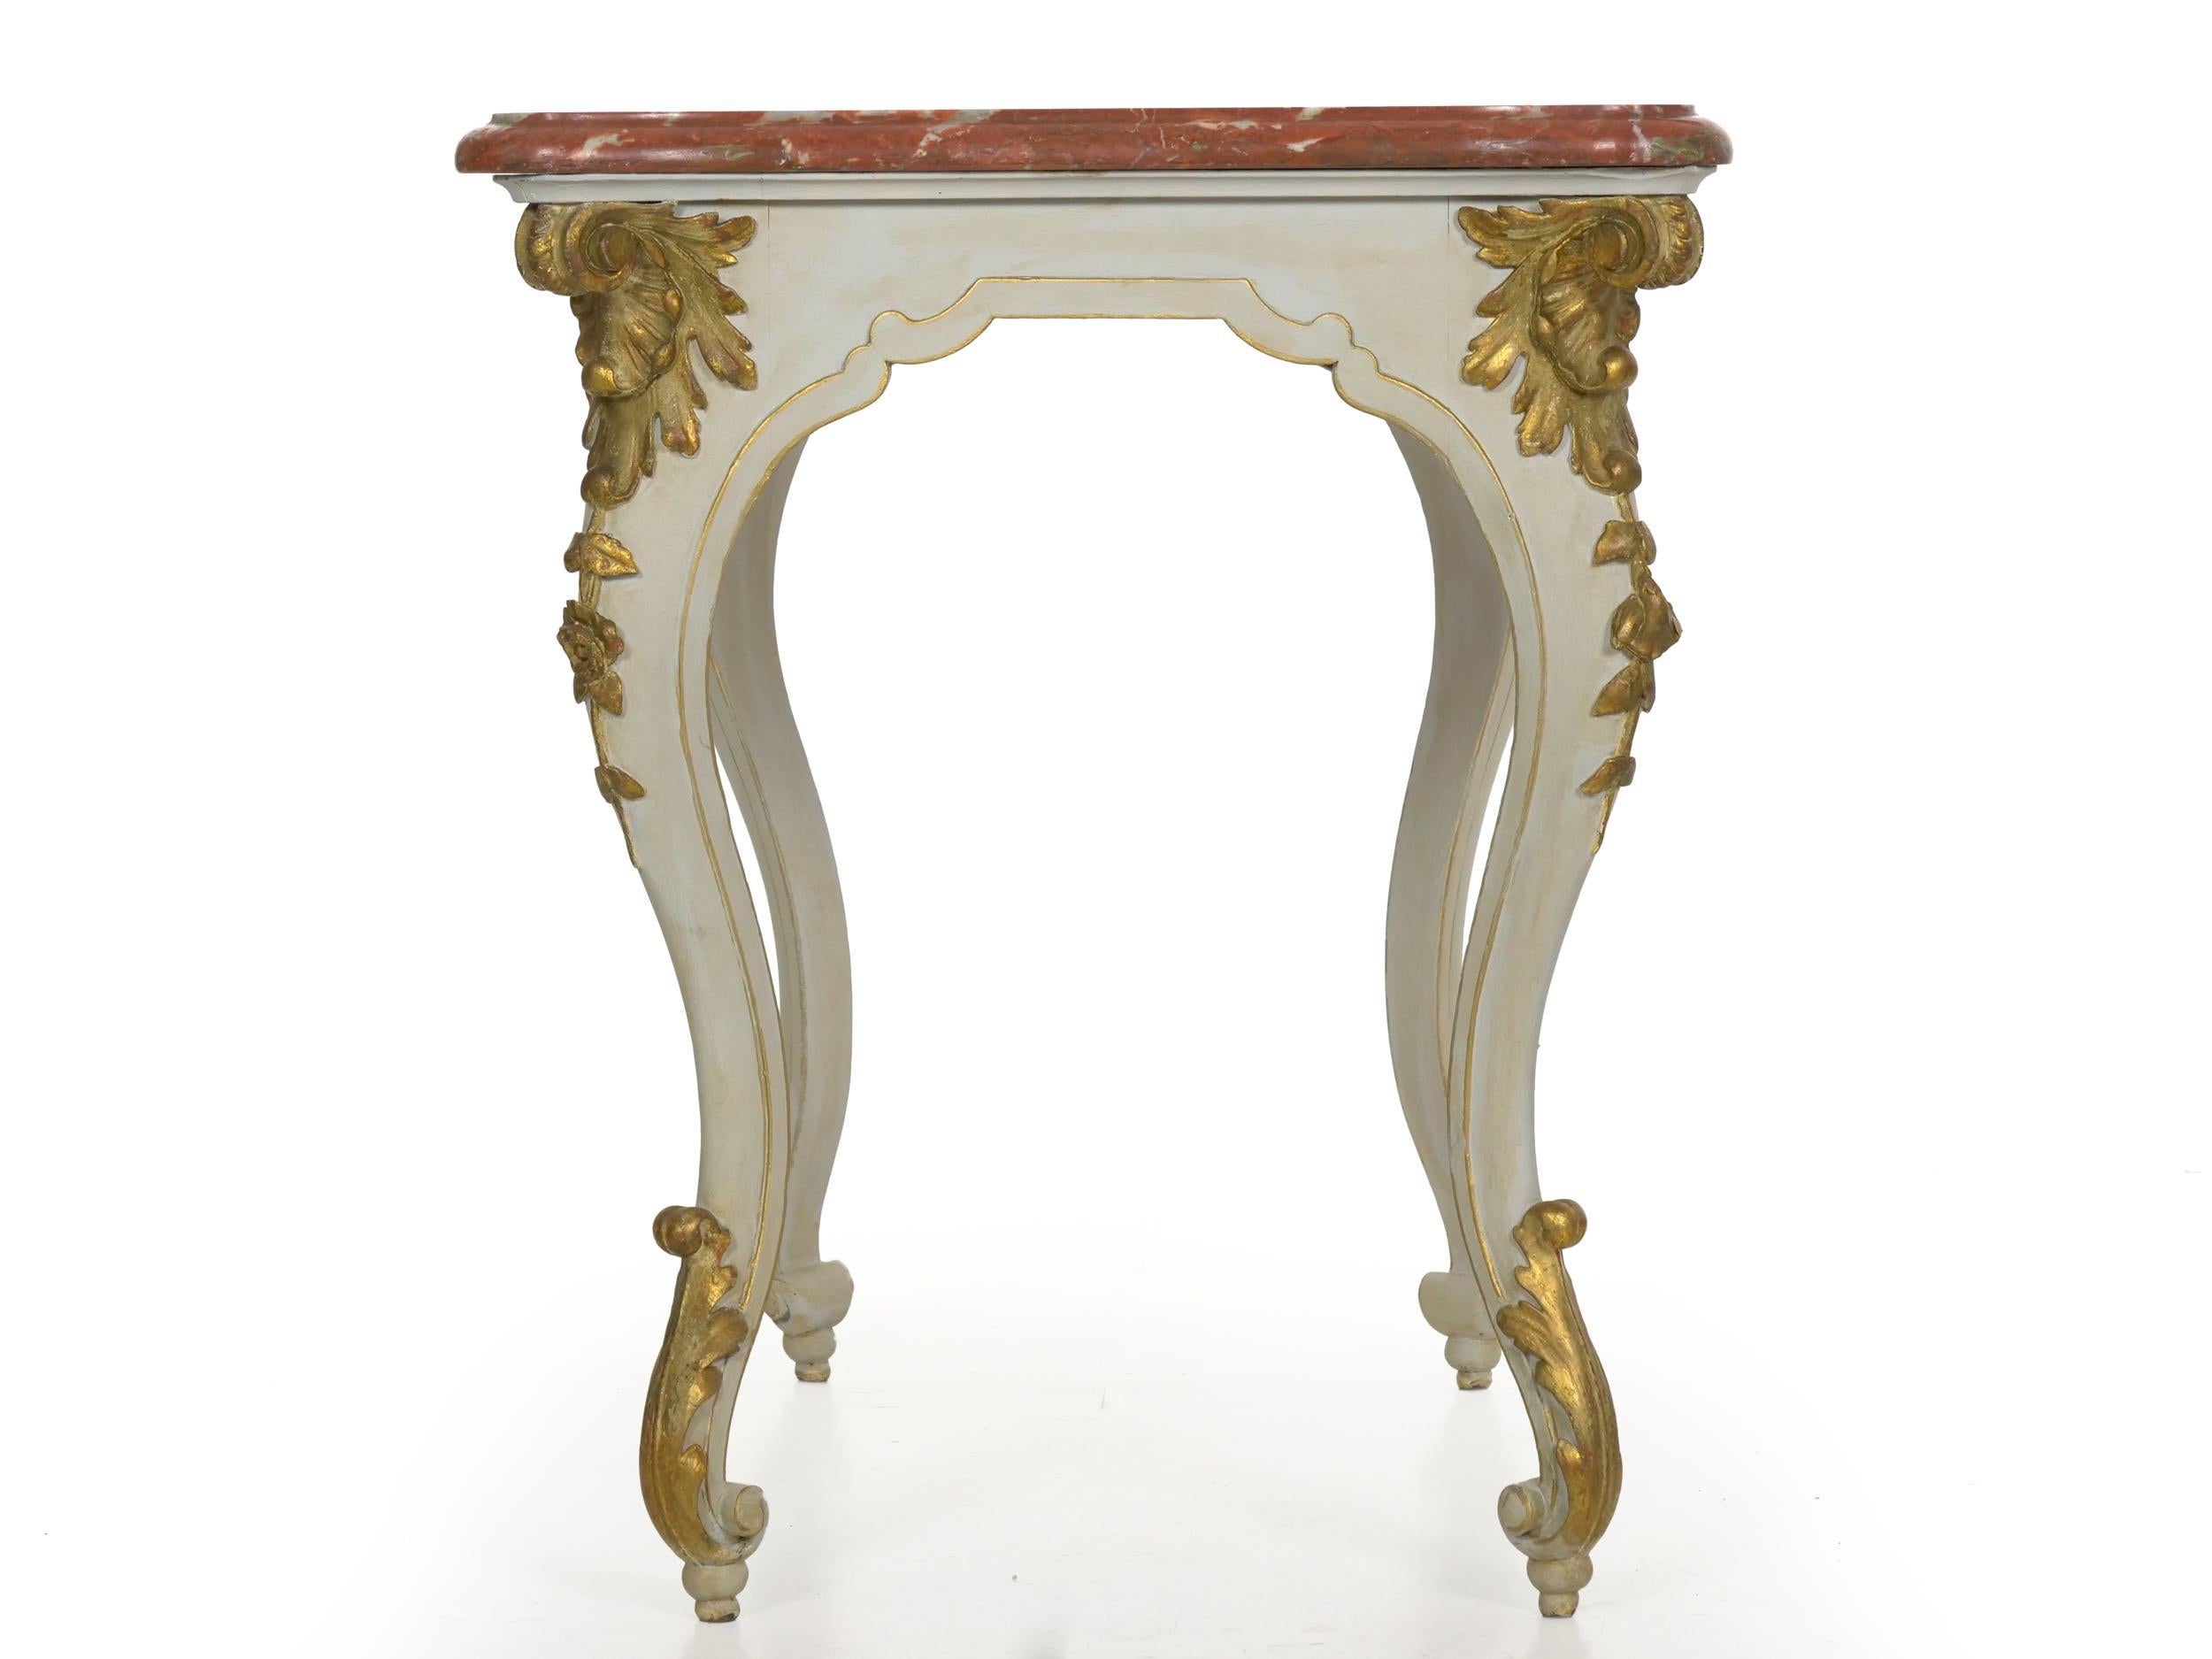 Marble Italian Rococo Painted Antique Accent Console Table in Venetian Taste